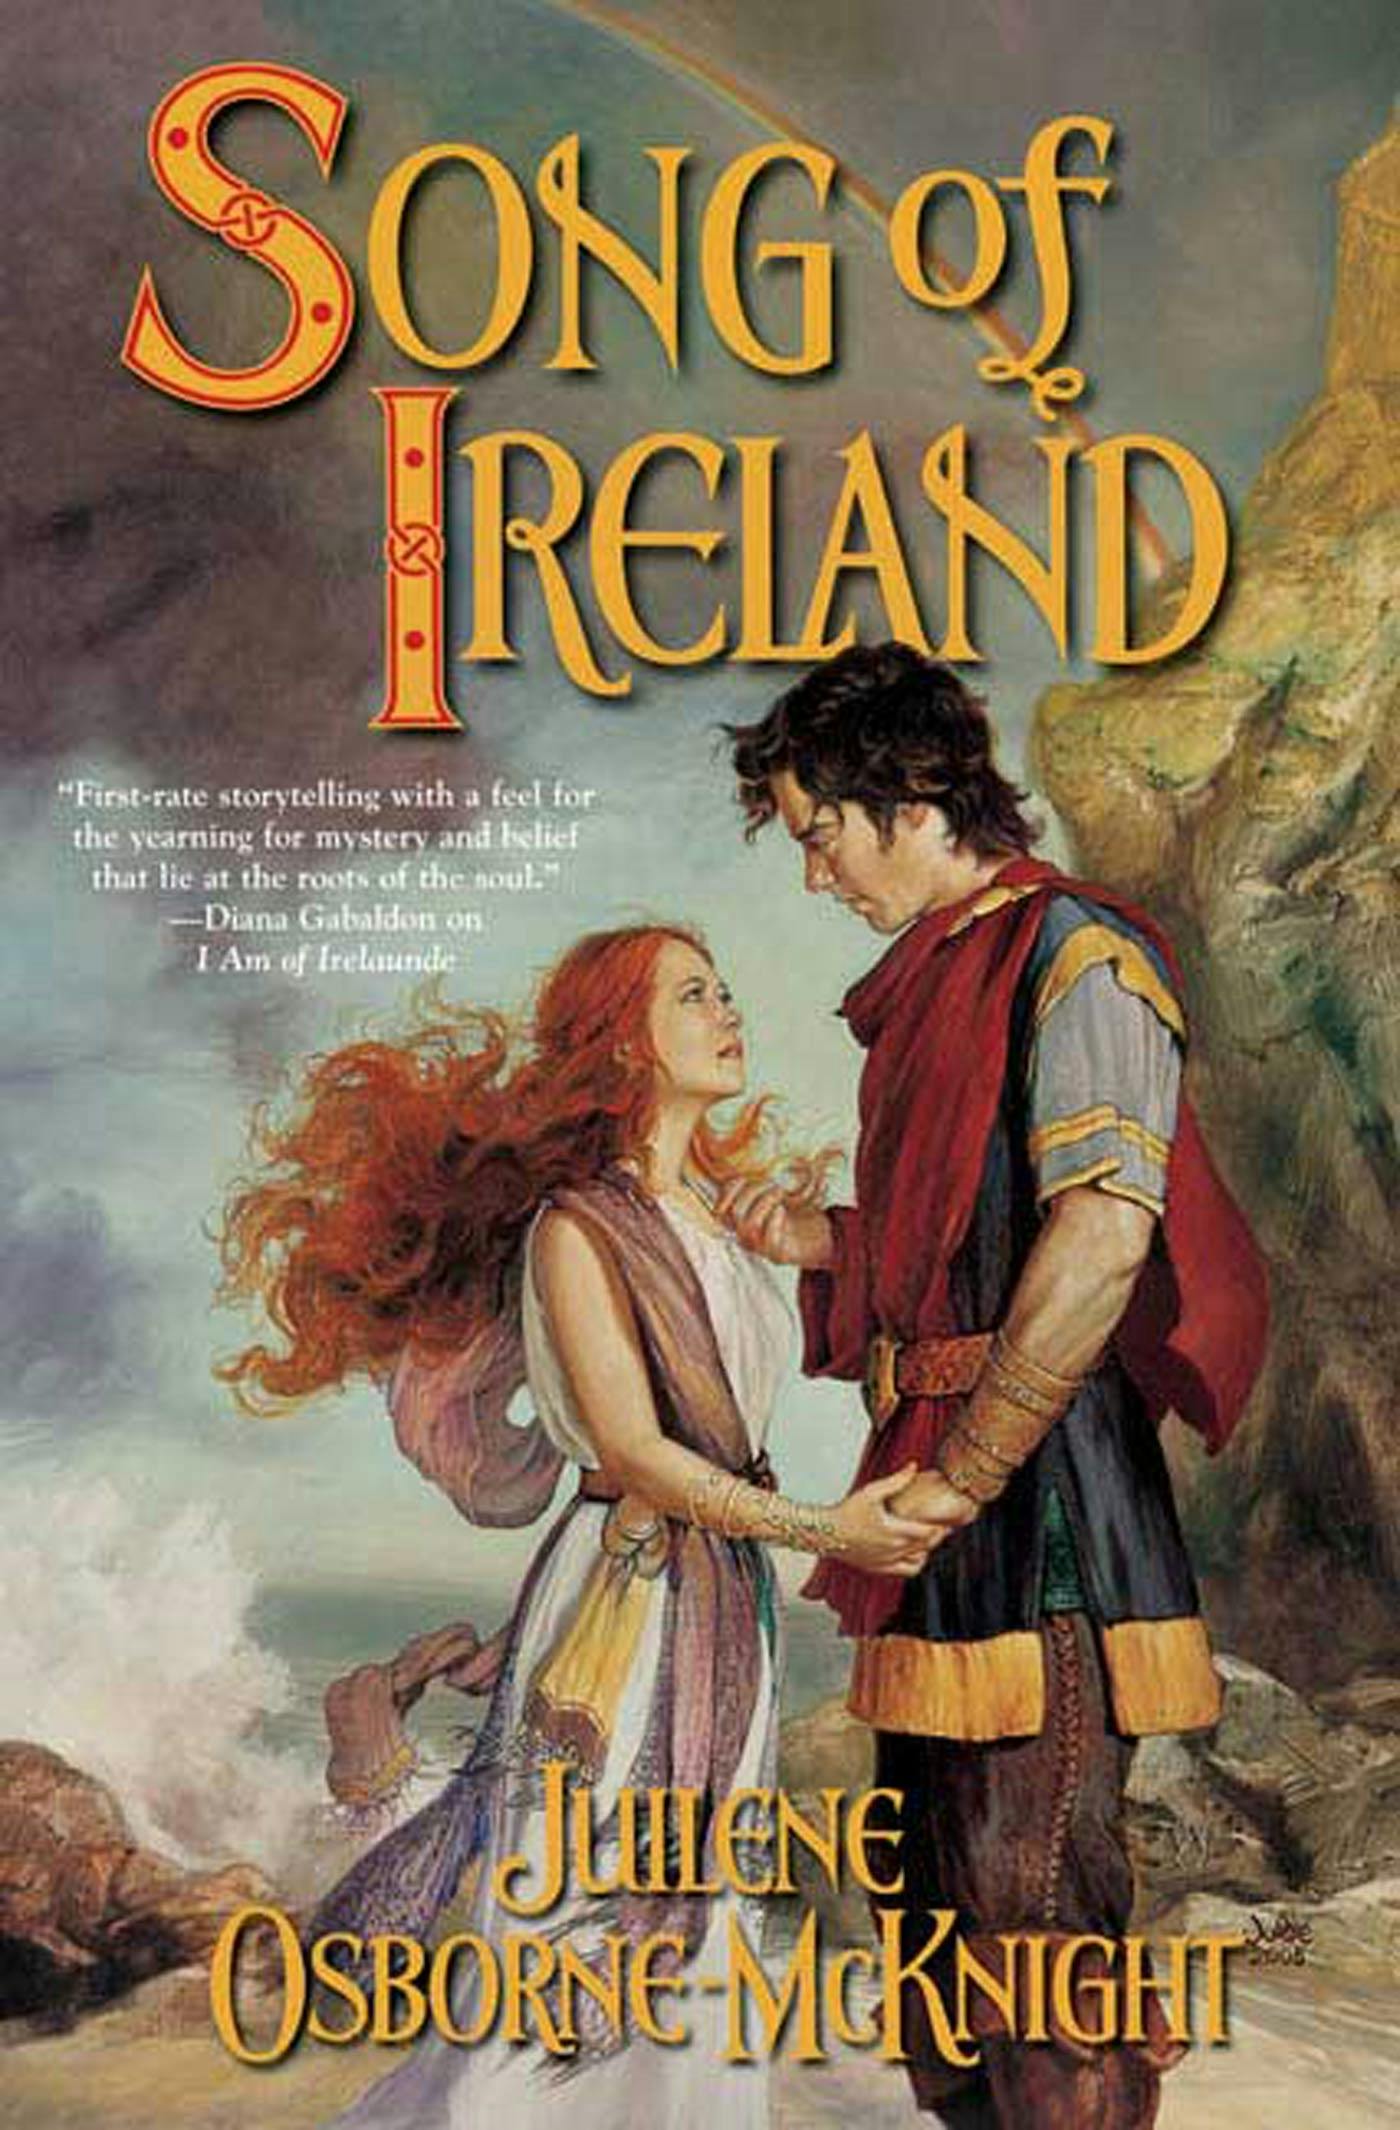 Cover for the book titled as: Song of Ireland